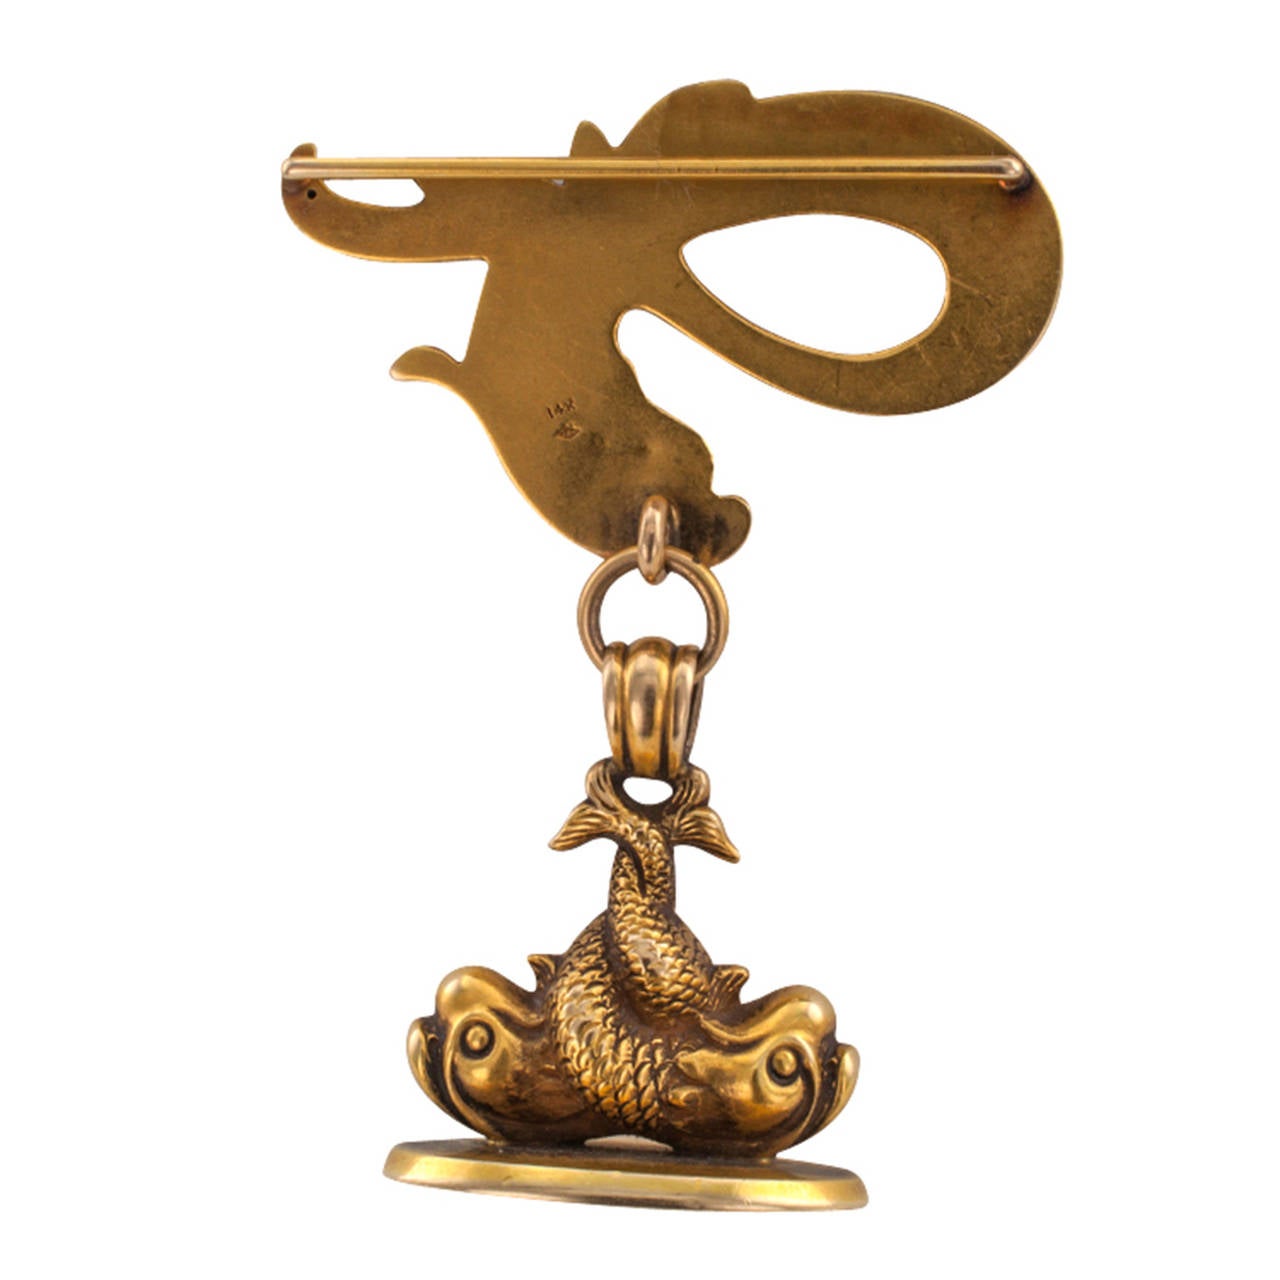 Art Nouveau Mythological Sea Creatures Watch Fob

Antique watch fob, circa 1905.  The design is composed by a trio of mythological marine beasts, the surmount features the largest of the three with a long and coiled tail, suspending from its mouth